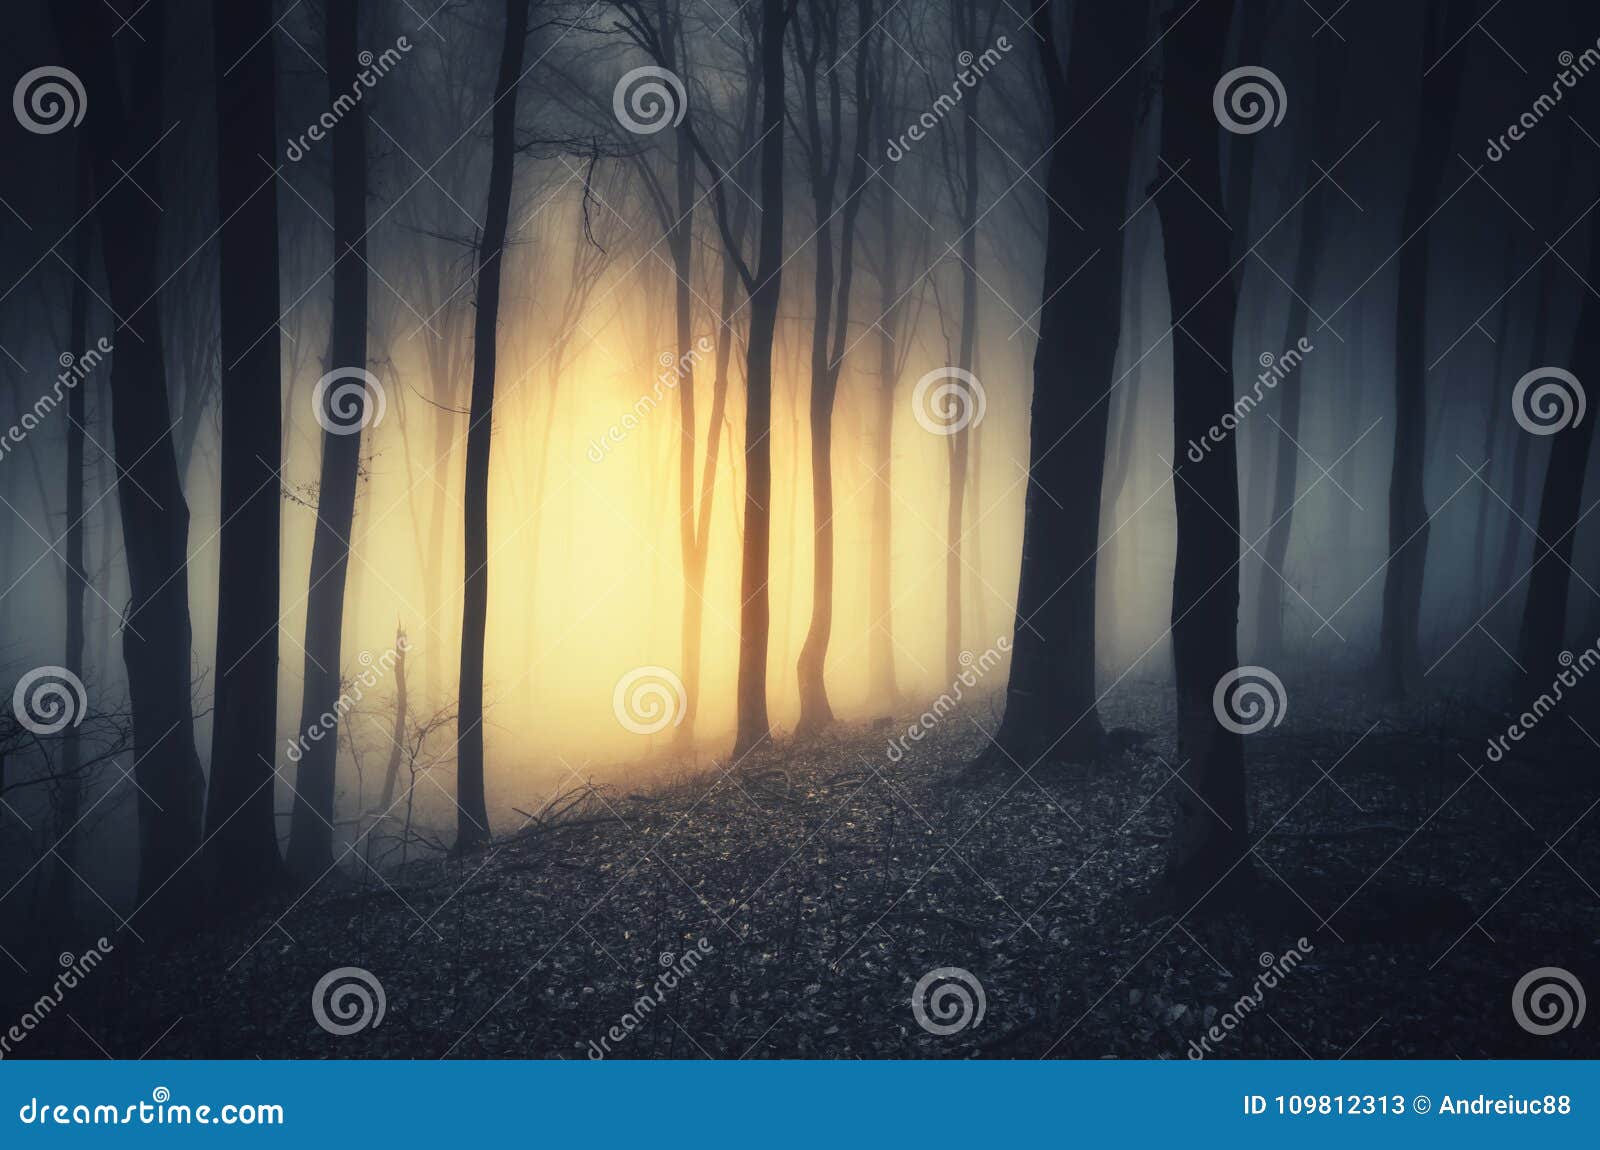 mysterious light in dark haunted forest at night